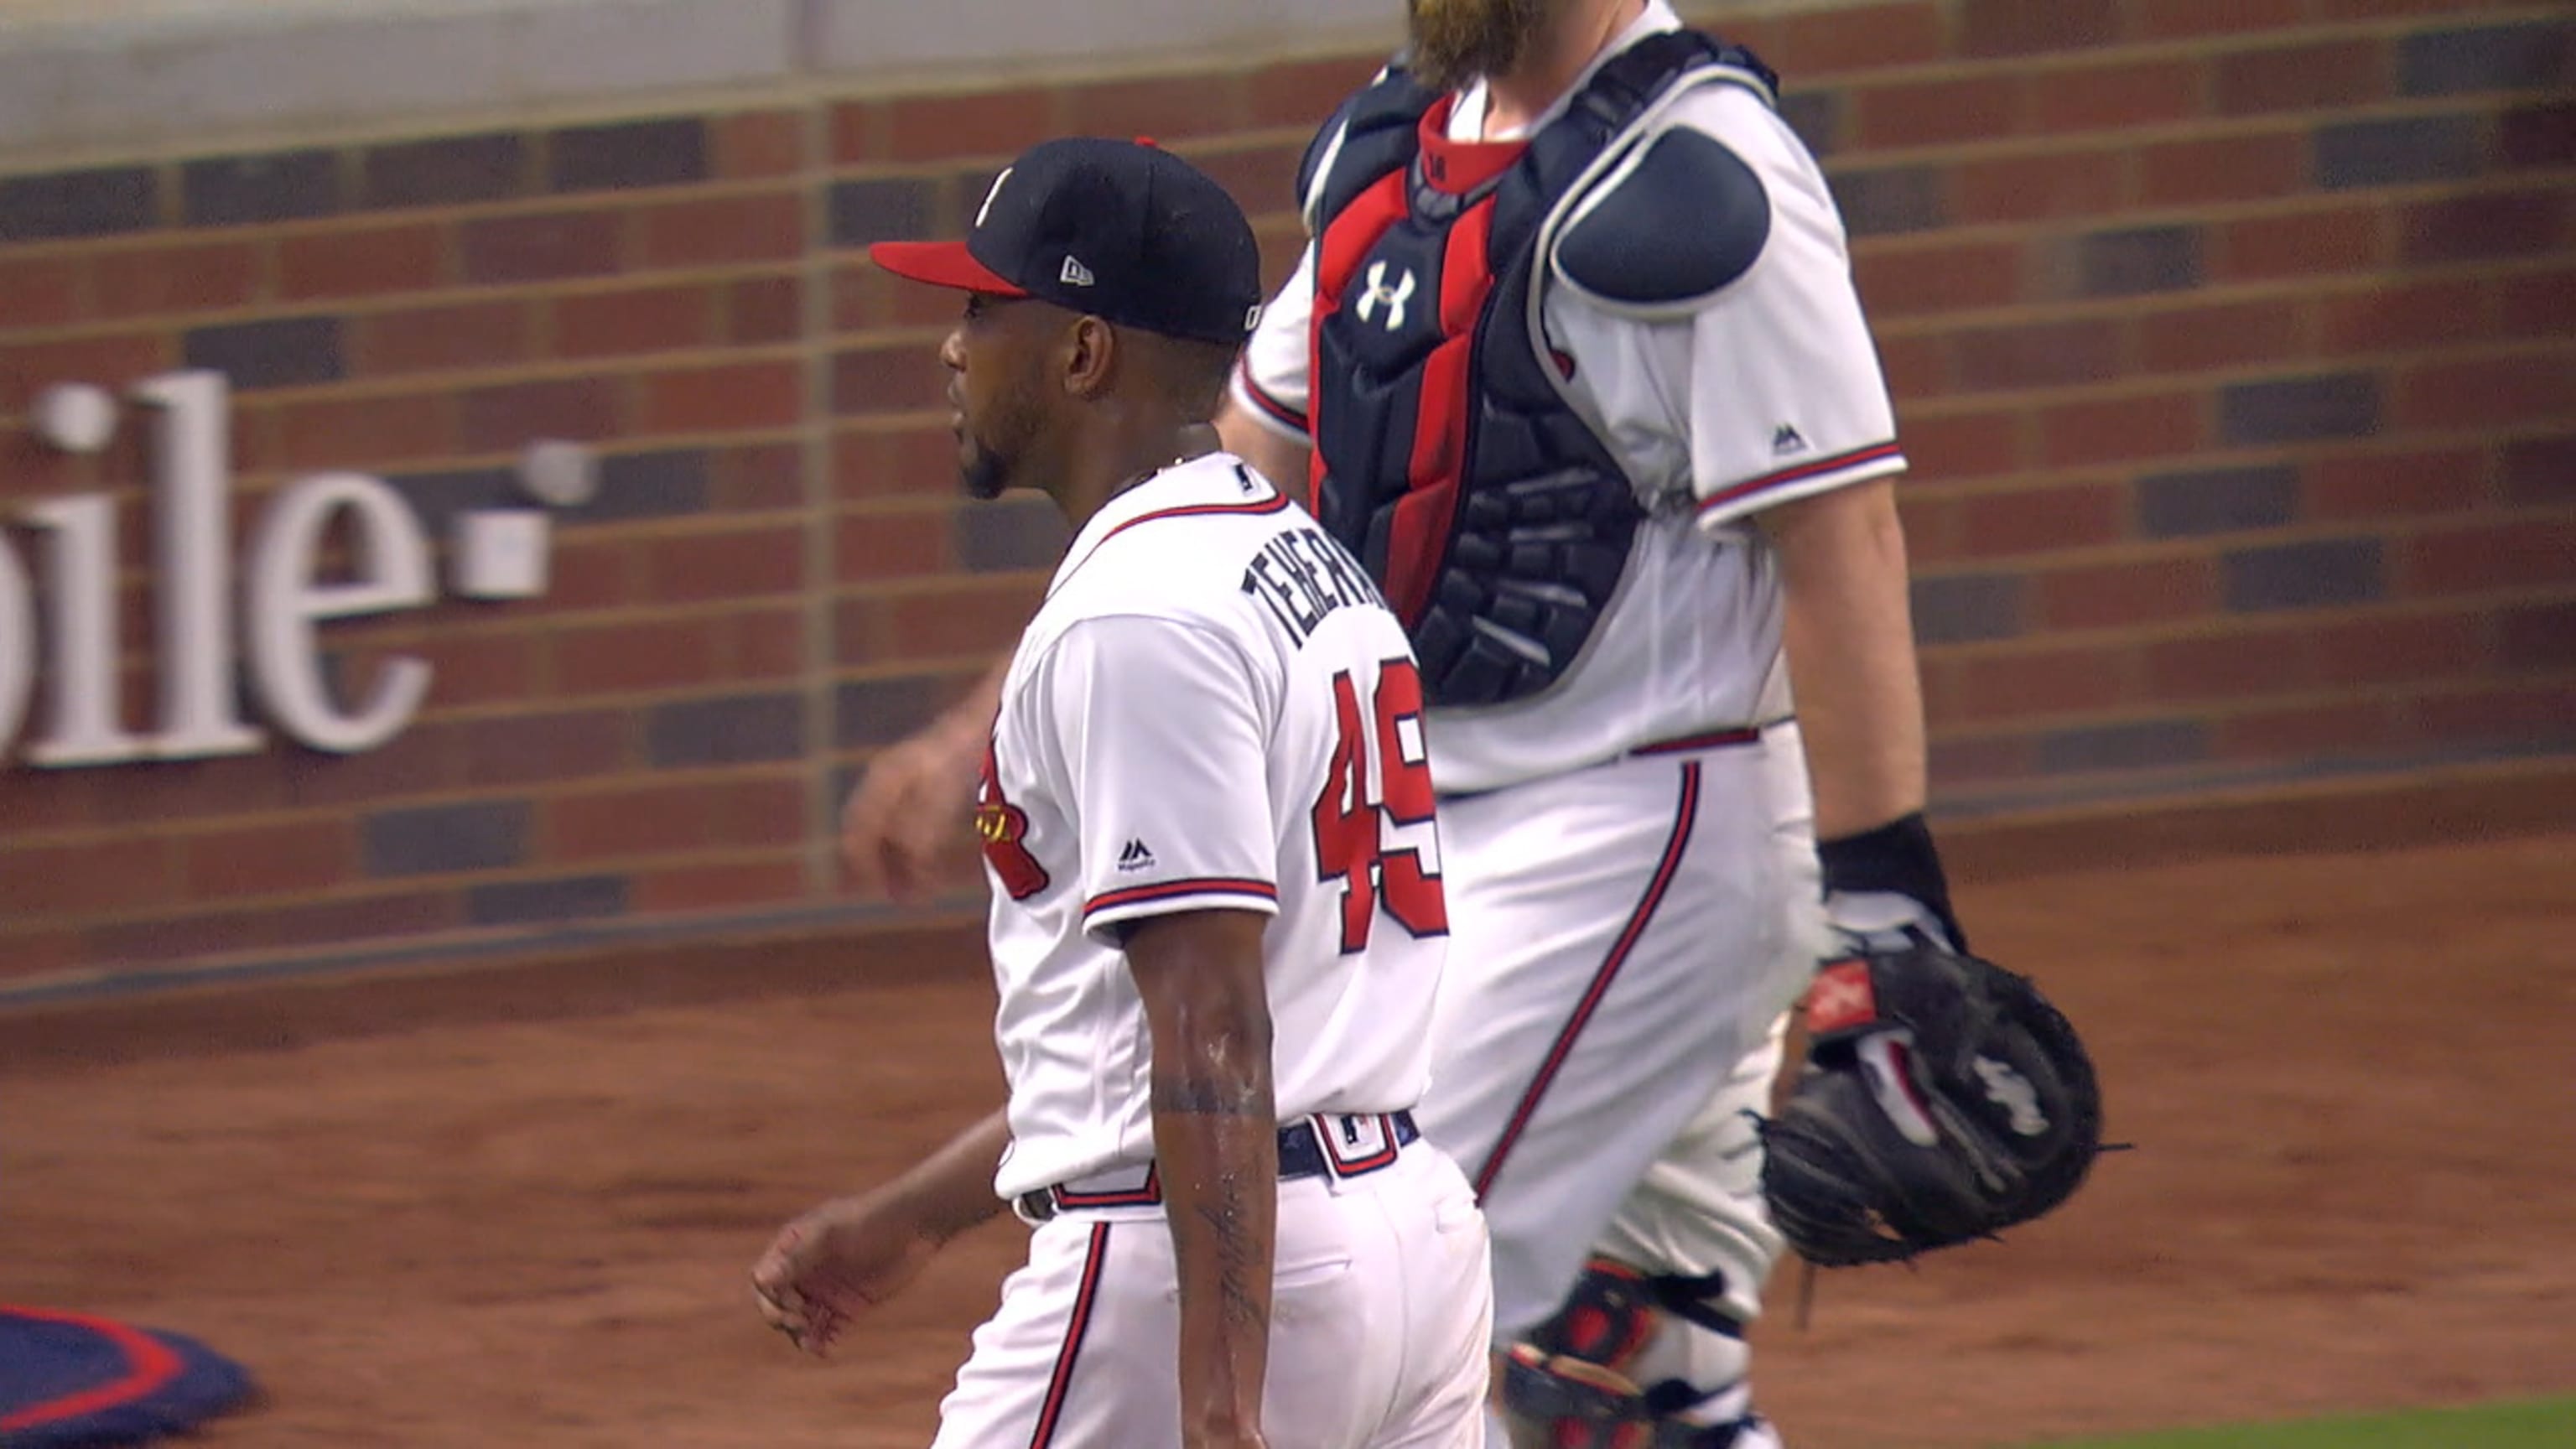 Late-night magic: Braves beat Dodgers 5-4, lead NLCS 2-0